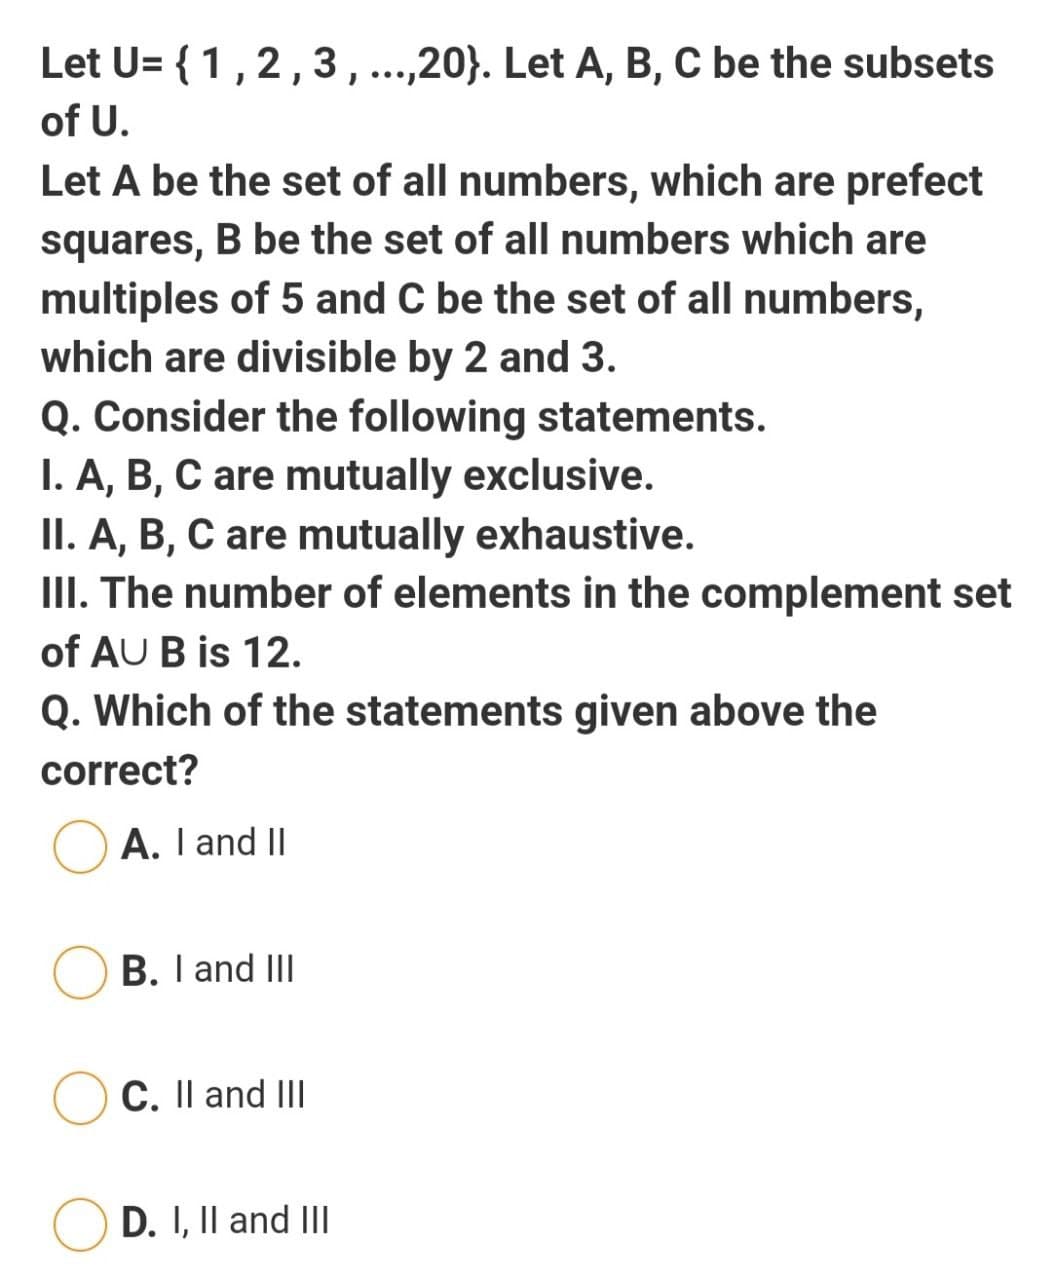 Let U= { 1,2,3,...,20}. Let A, B, C be the subsets
of U.
Let A be the set of all numbers, which are prefect
squares, B be the set of all numbers which are
multiples of 5 and C be the set of all numbers,
which are divisible by 2 and 3.
Q. Consider the following statements.
I. A, B, C are mutually exclusive.
II. A, B, C are mutually exhaustive.
III. The number of elements in the complement set
of AU B is 12.
Q. Which of the statements given above the
correct?
A. I and II
B. I and III
C. Il and III
D. I, Il and II
